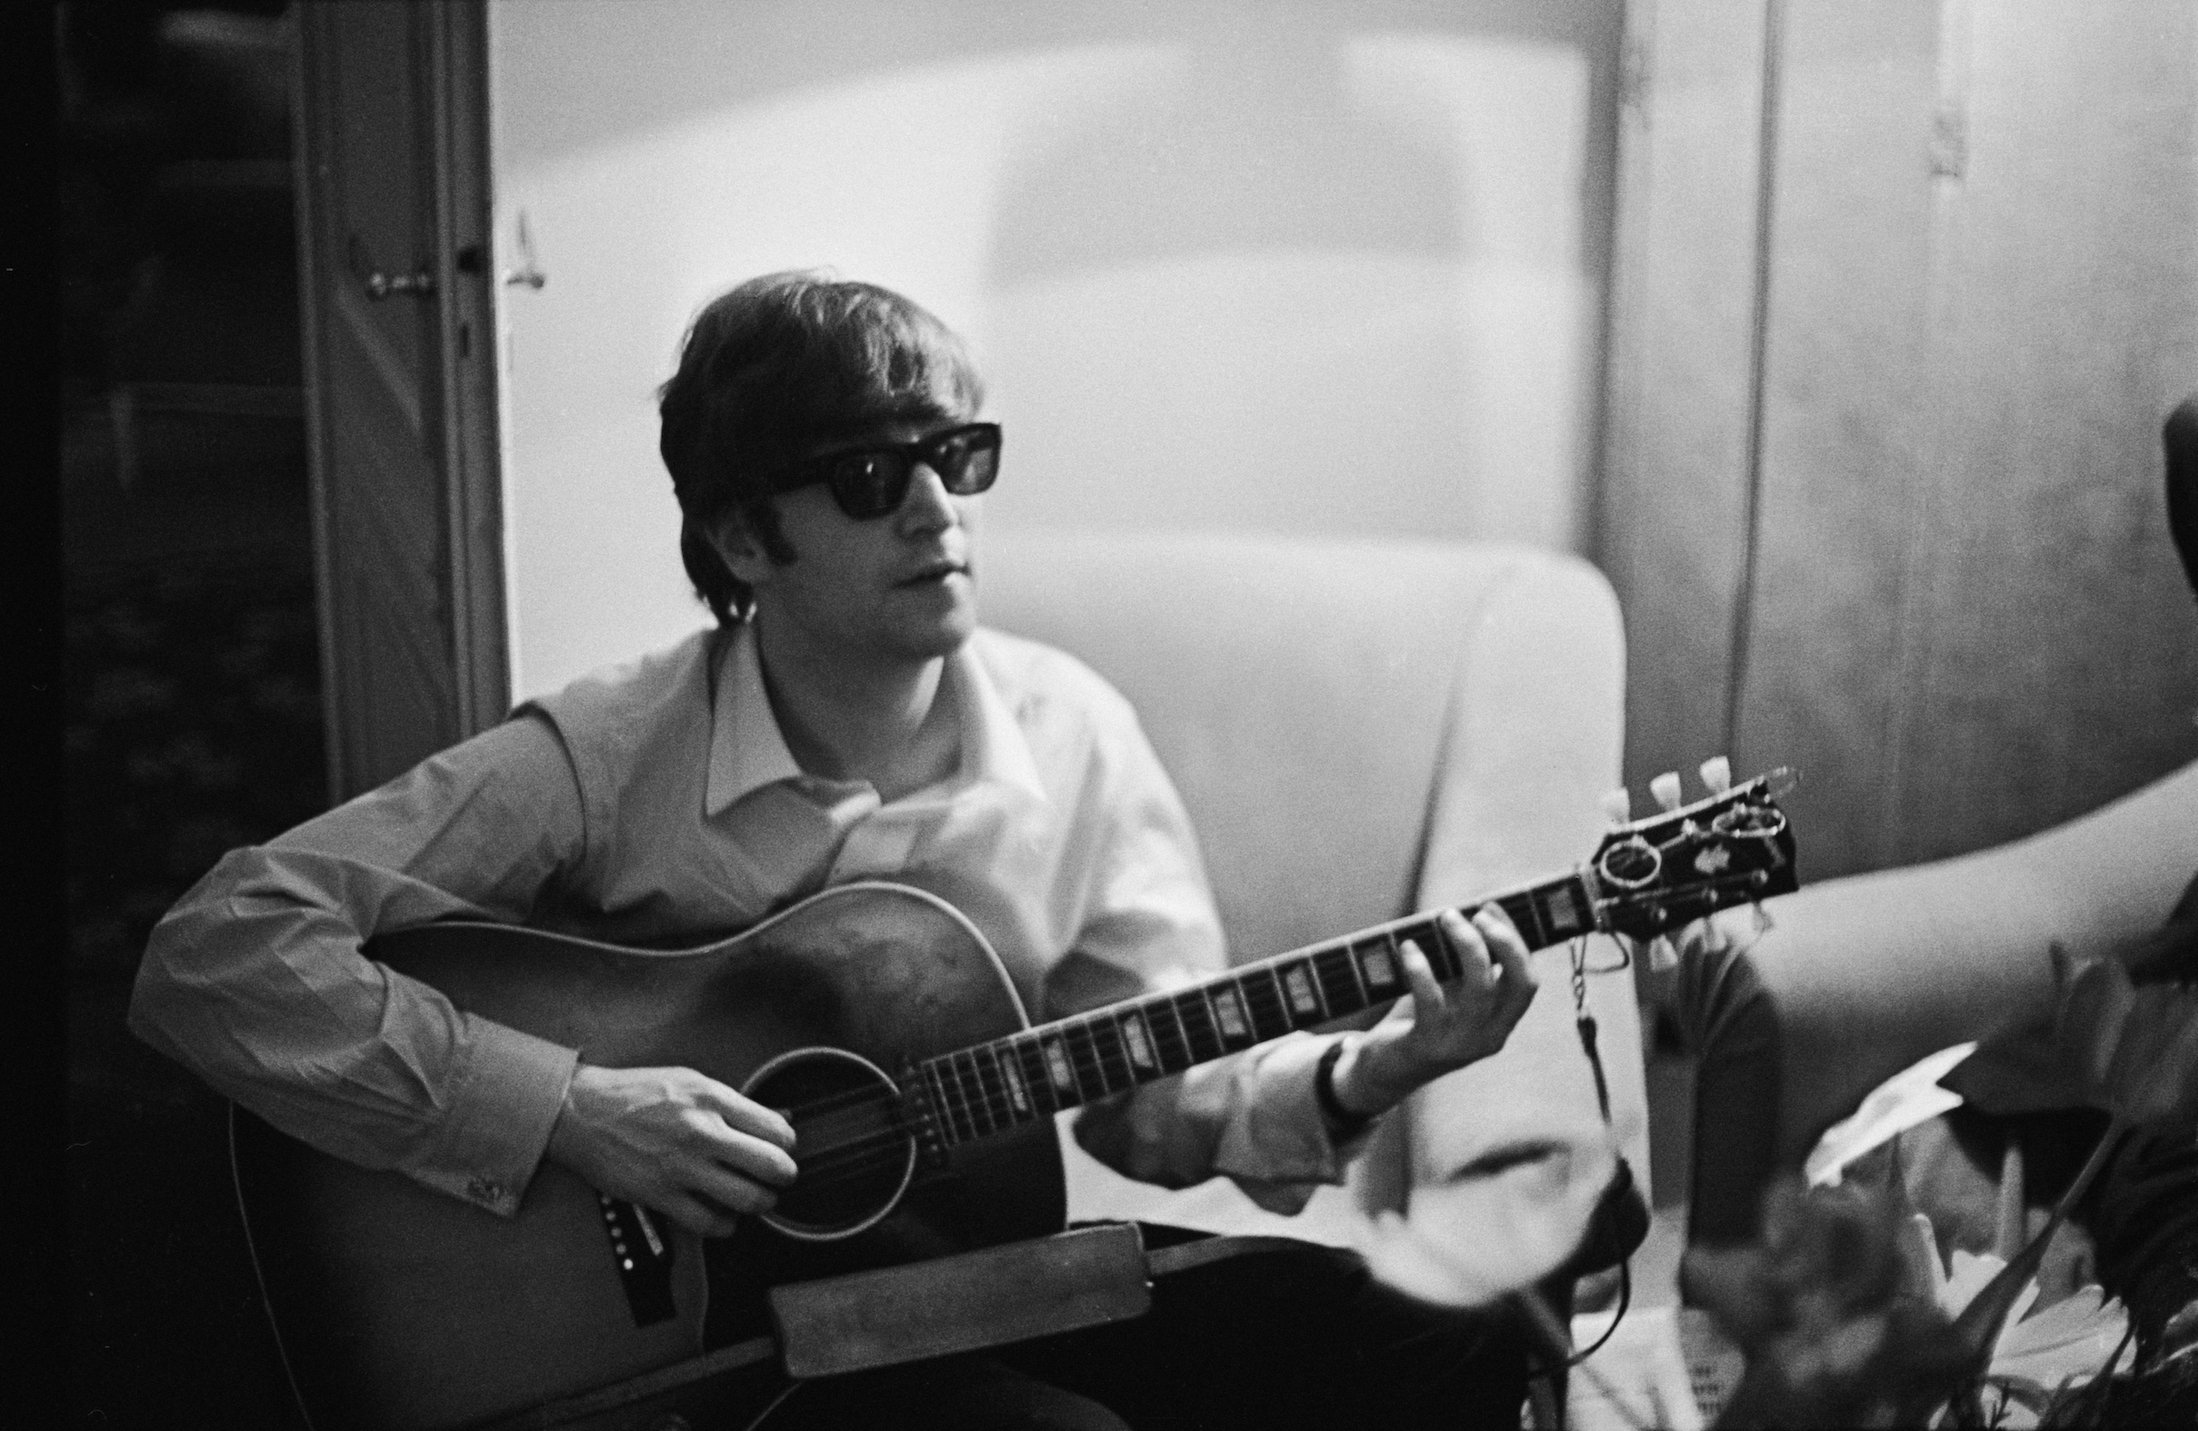 John Lennon of The Beatles plays the guitar in a hotel room in Paris